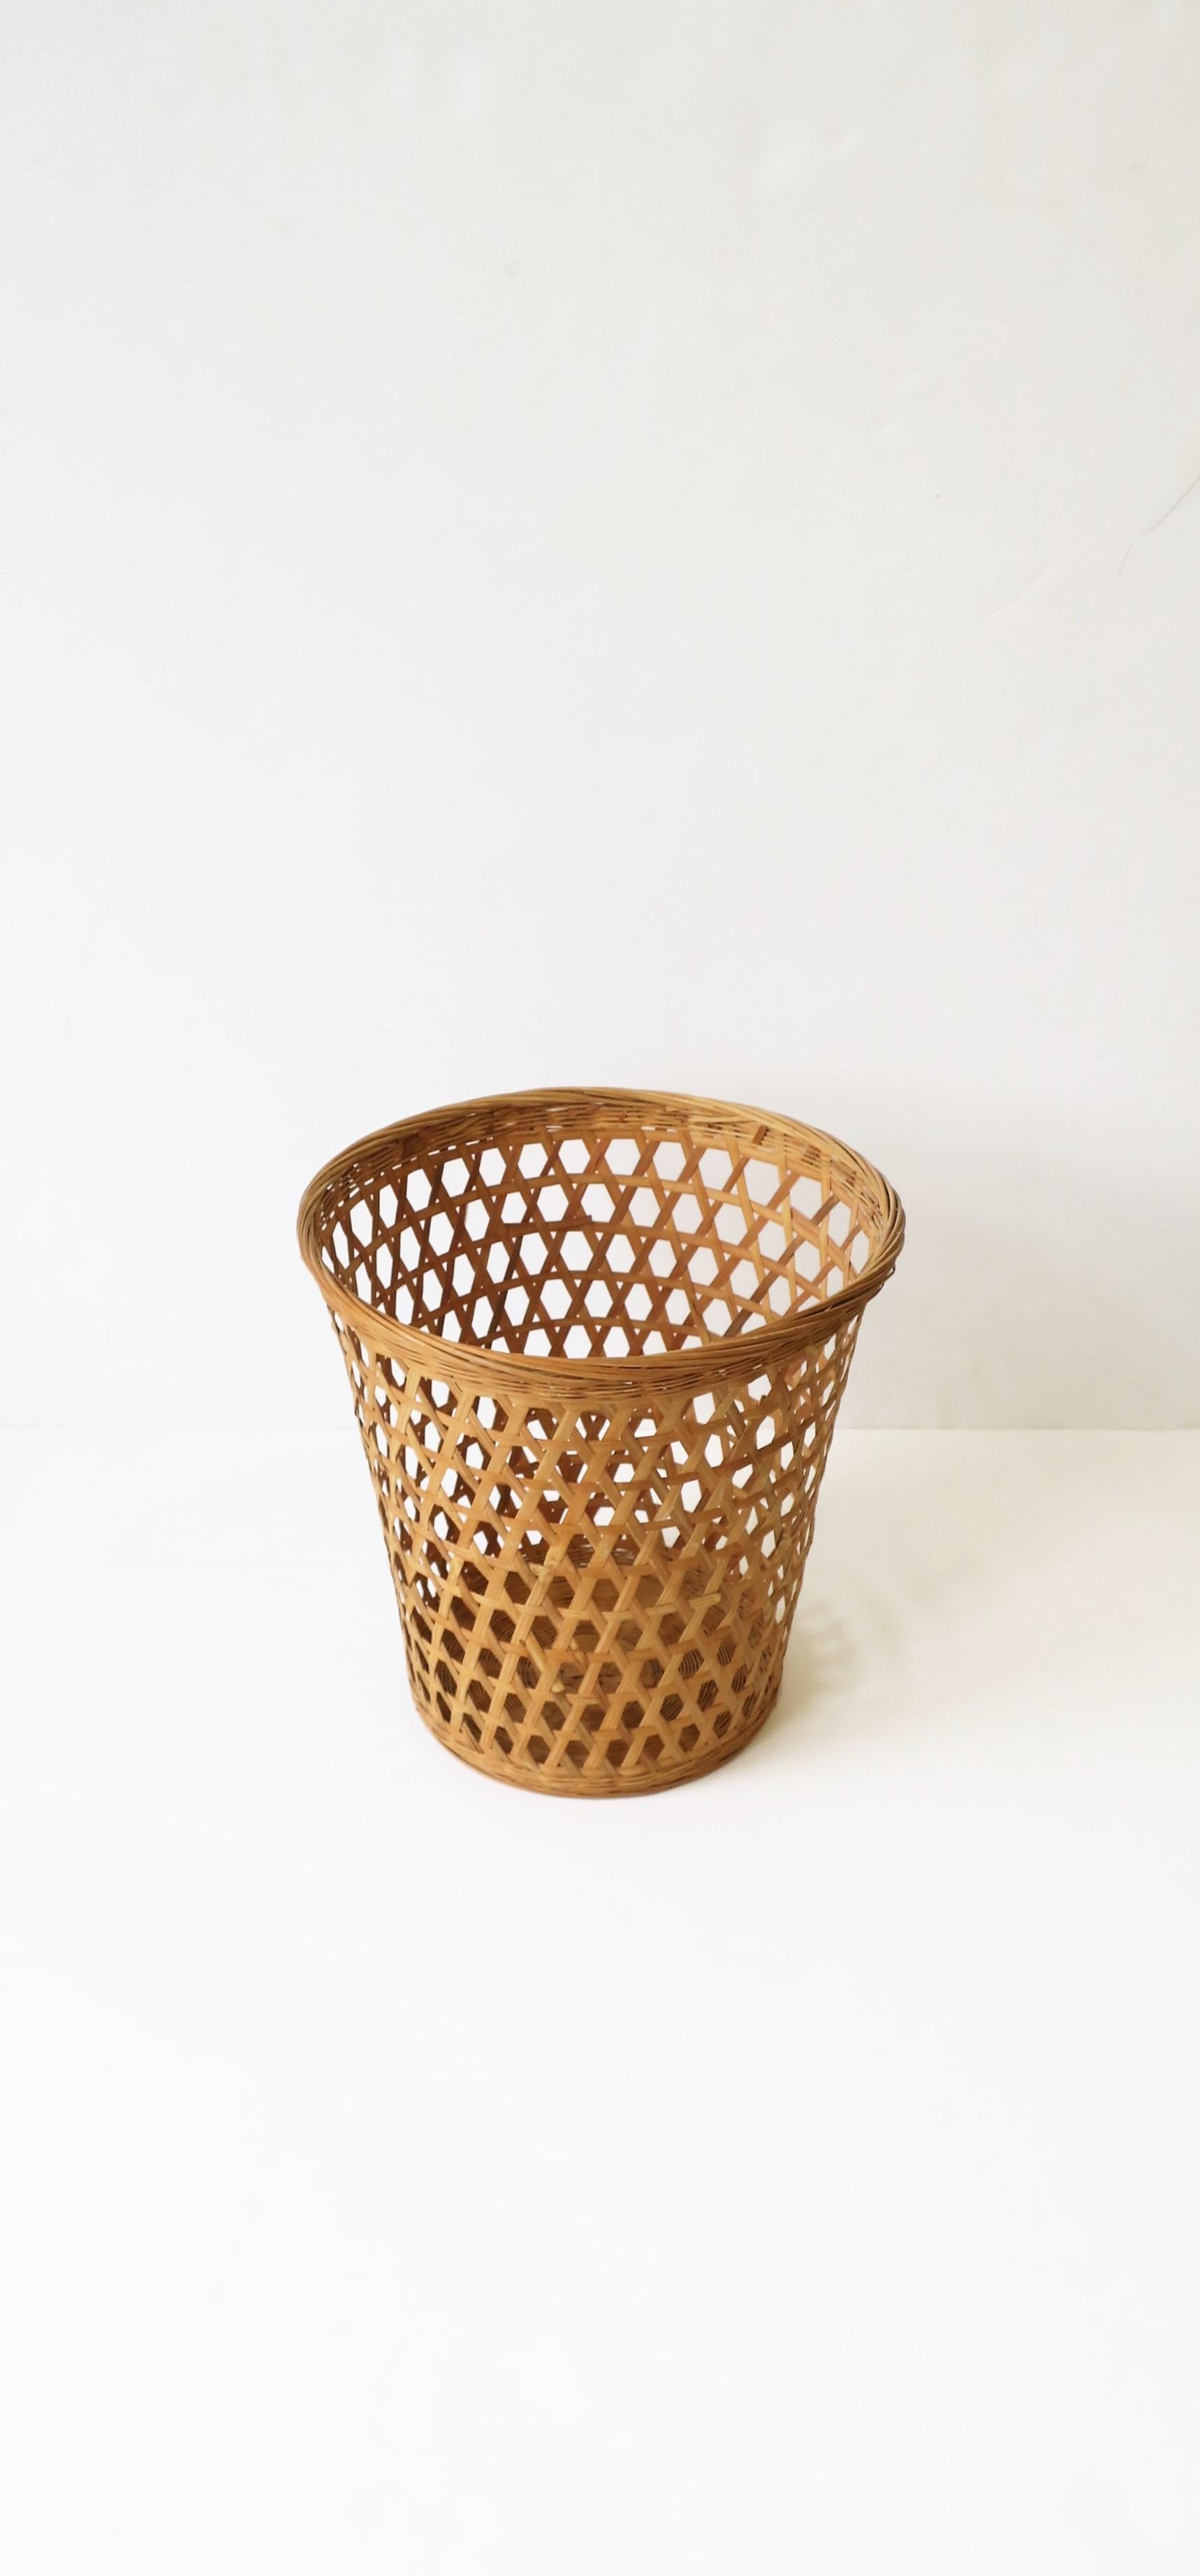 A great wicker wastebasket or trash can, circa mid to late 20th century. Piece could work well in any room in the house including an office, library, bathroom, bedroom, etc. 

Dimensions: 7.5